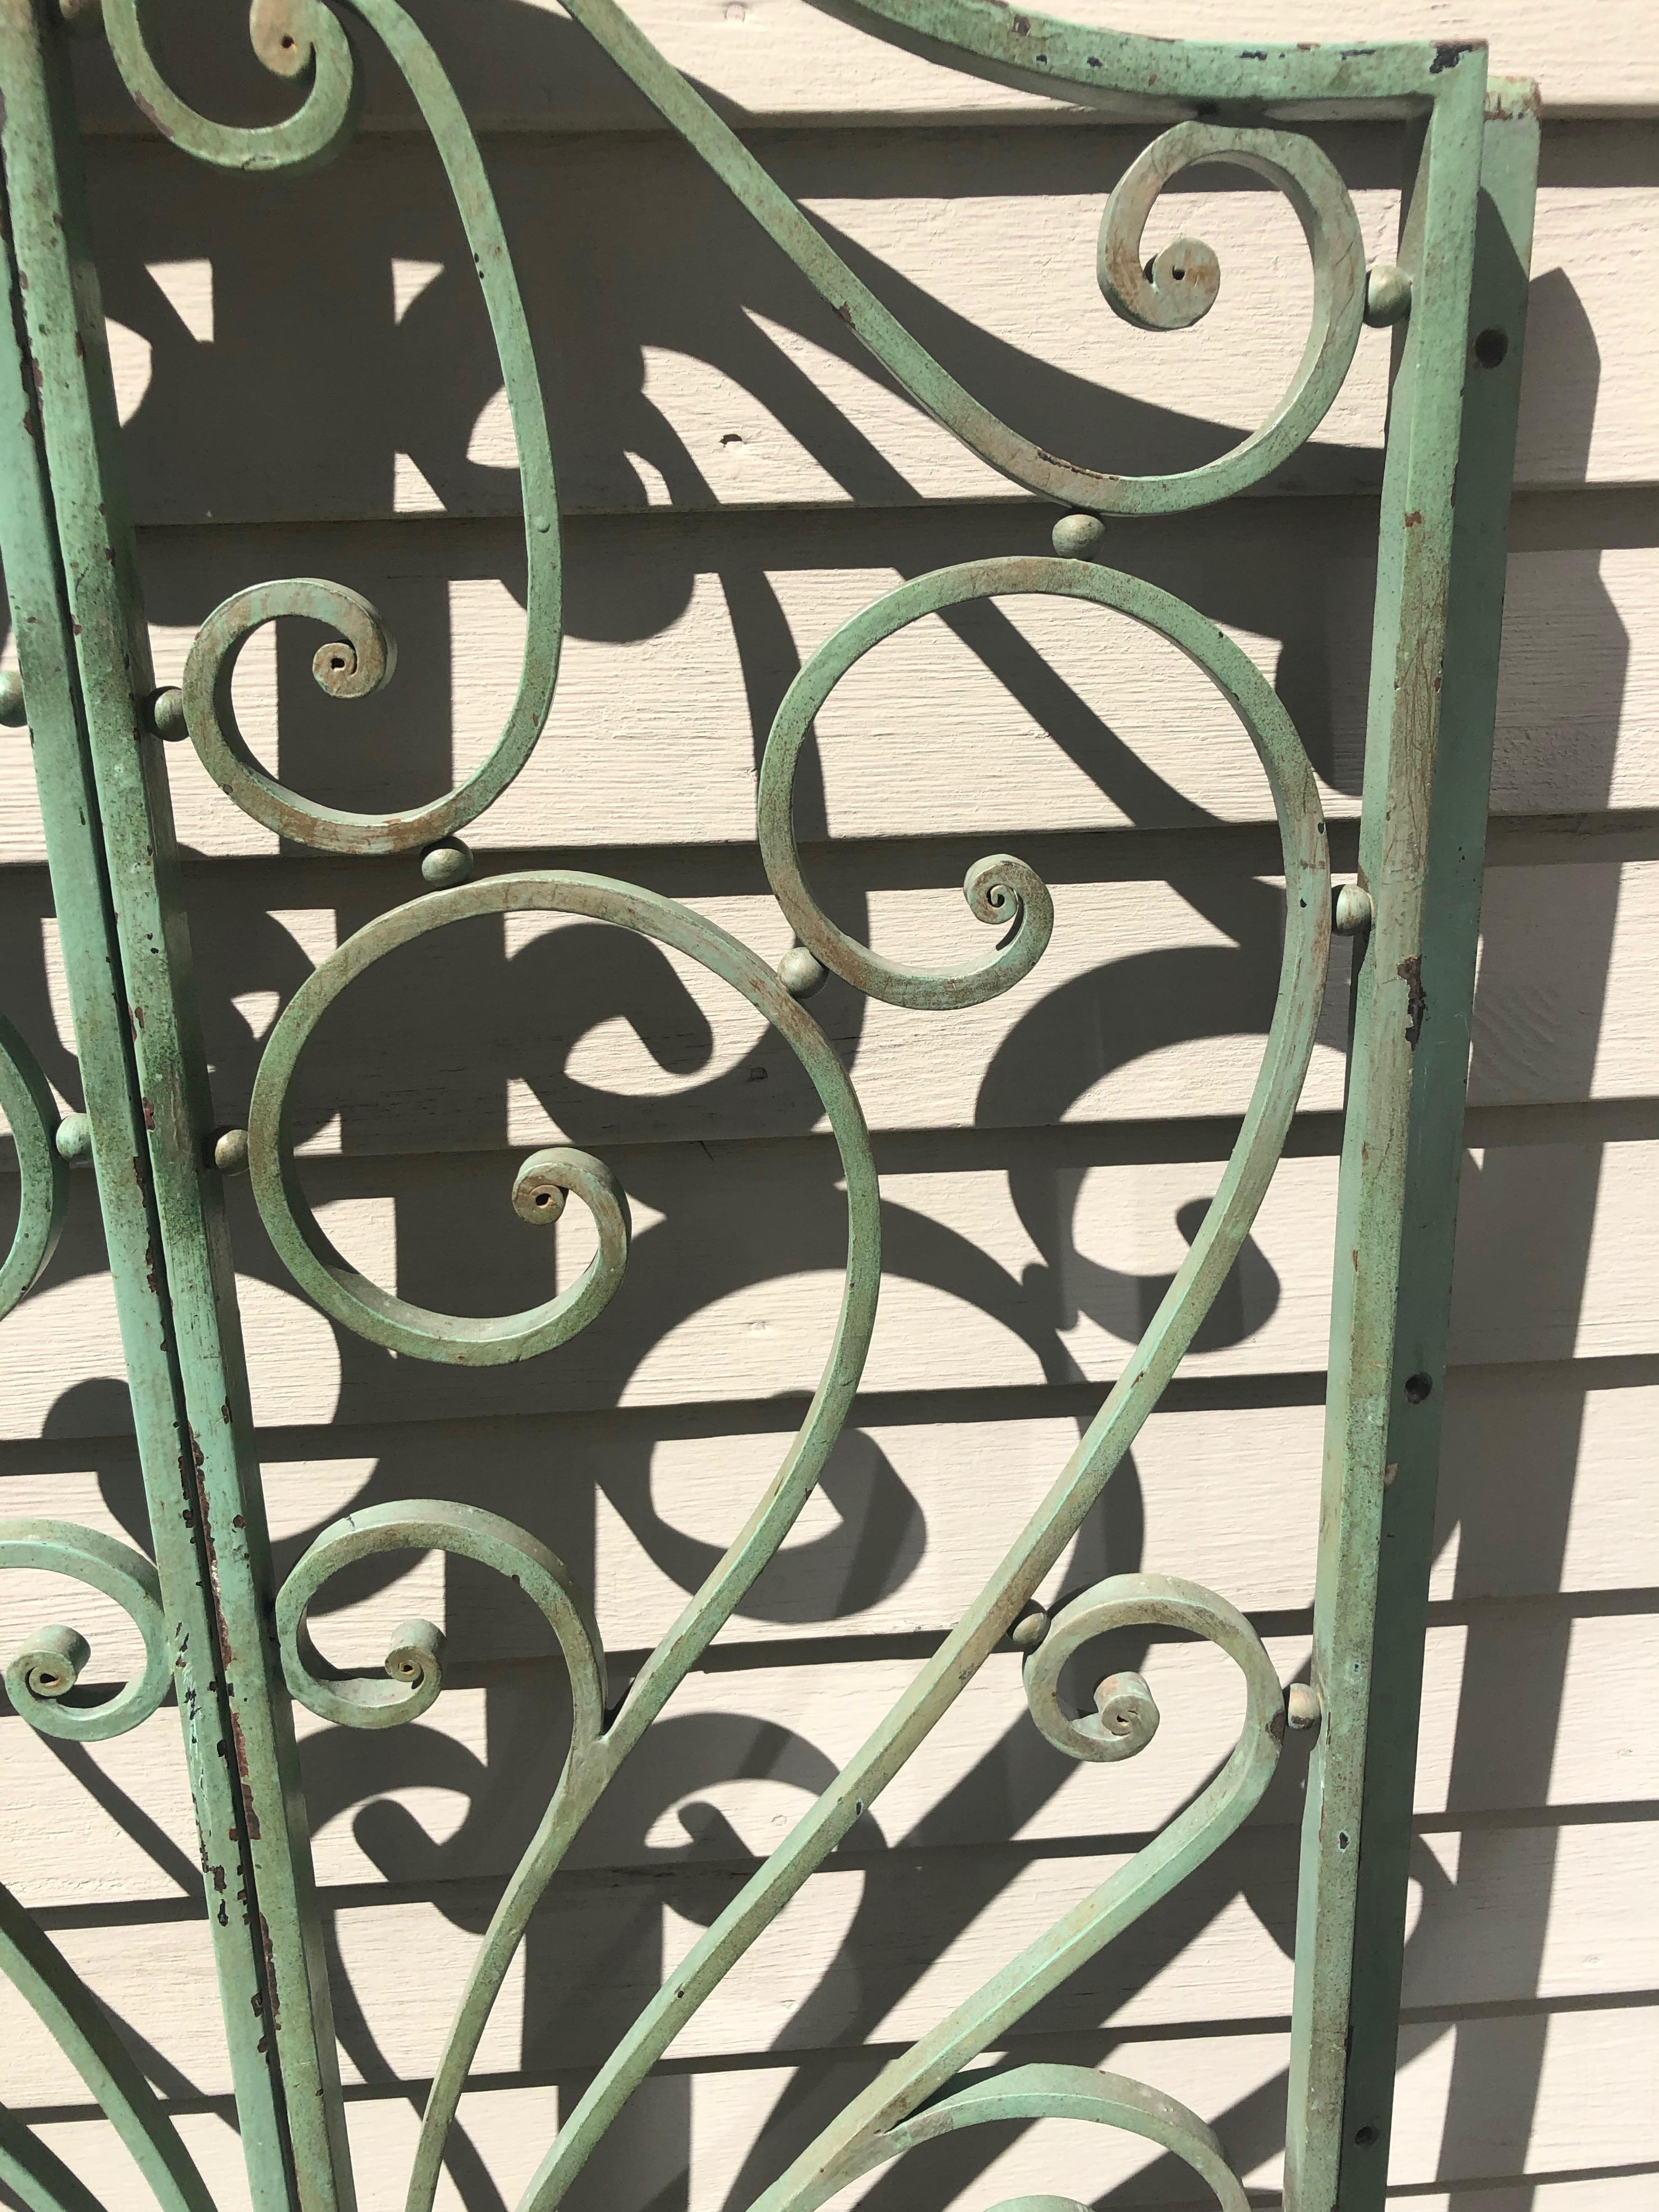 20th Century Pair of French Wrought Iron Beaux Arts-Style Gates with Mounting Hardware #1